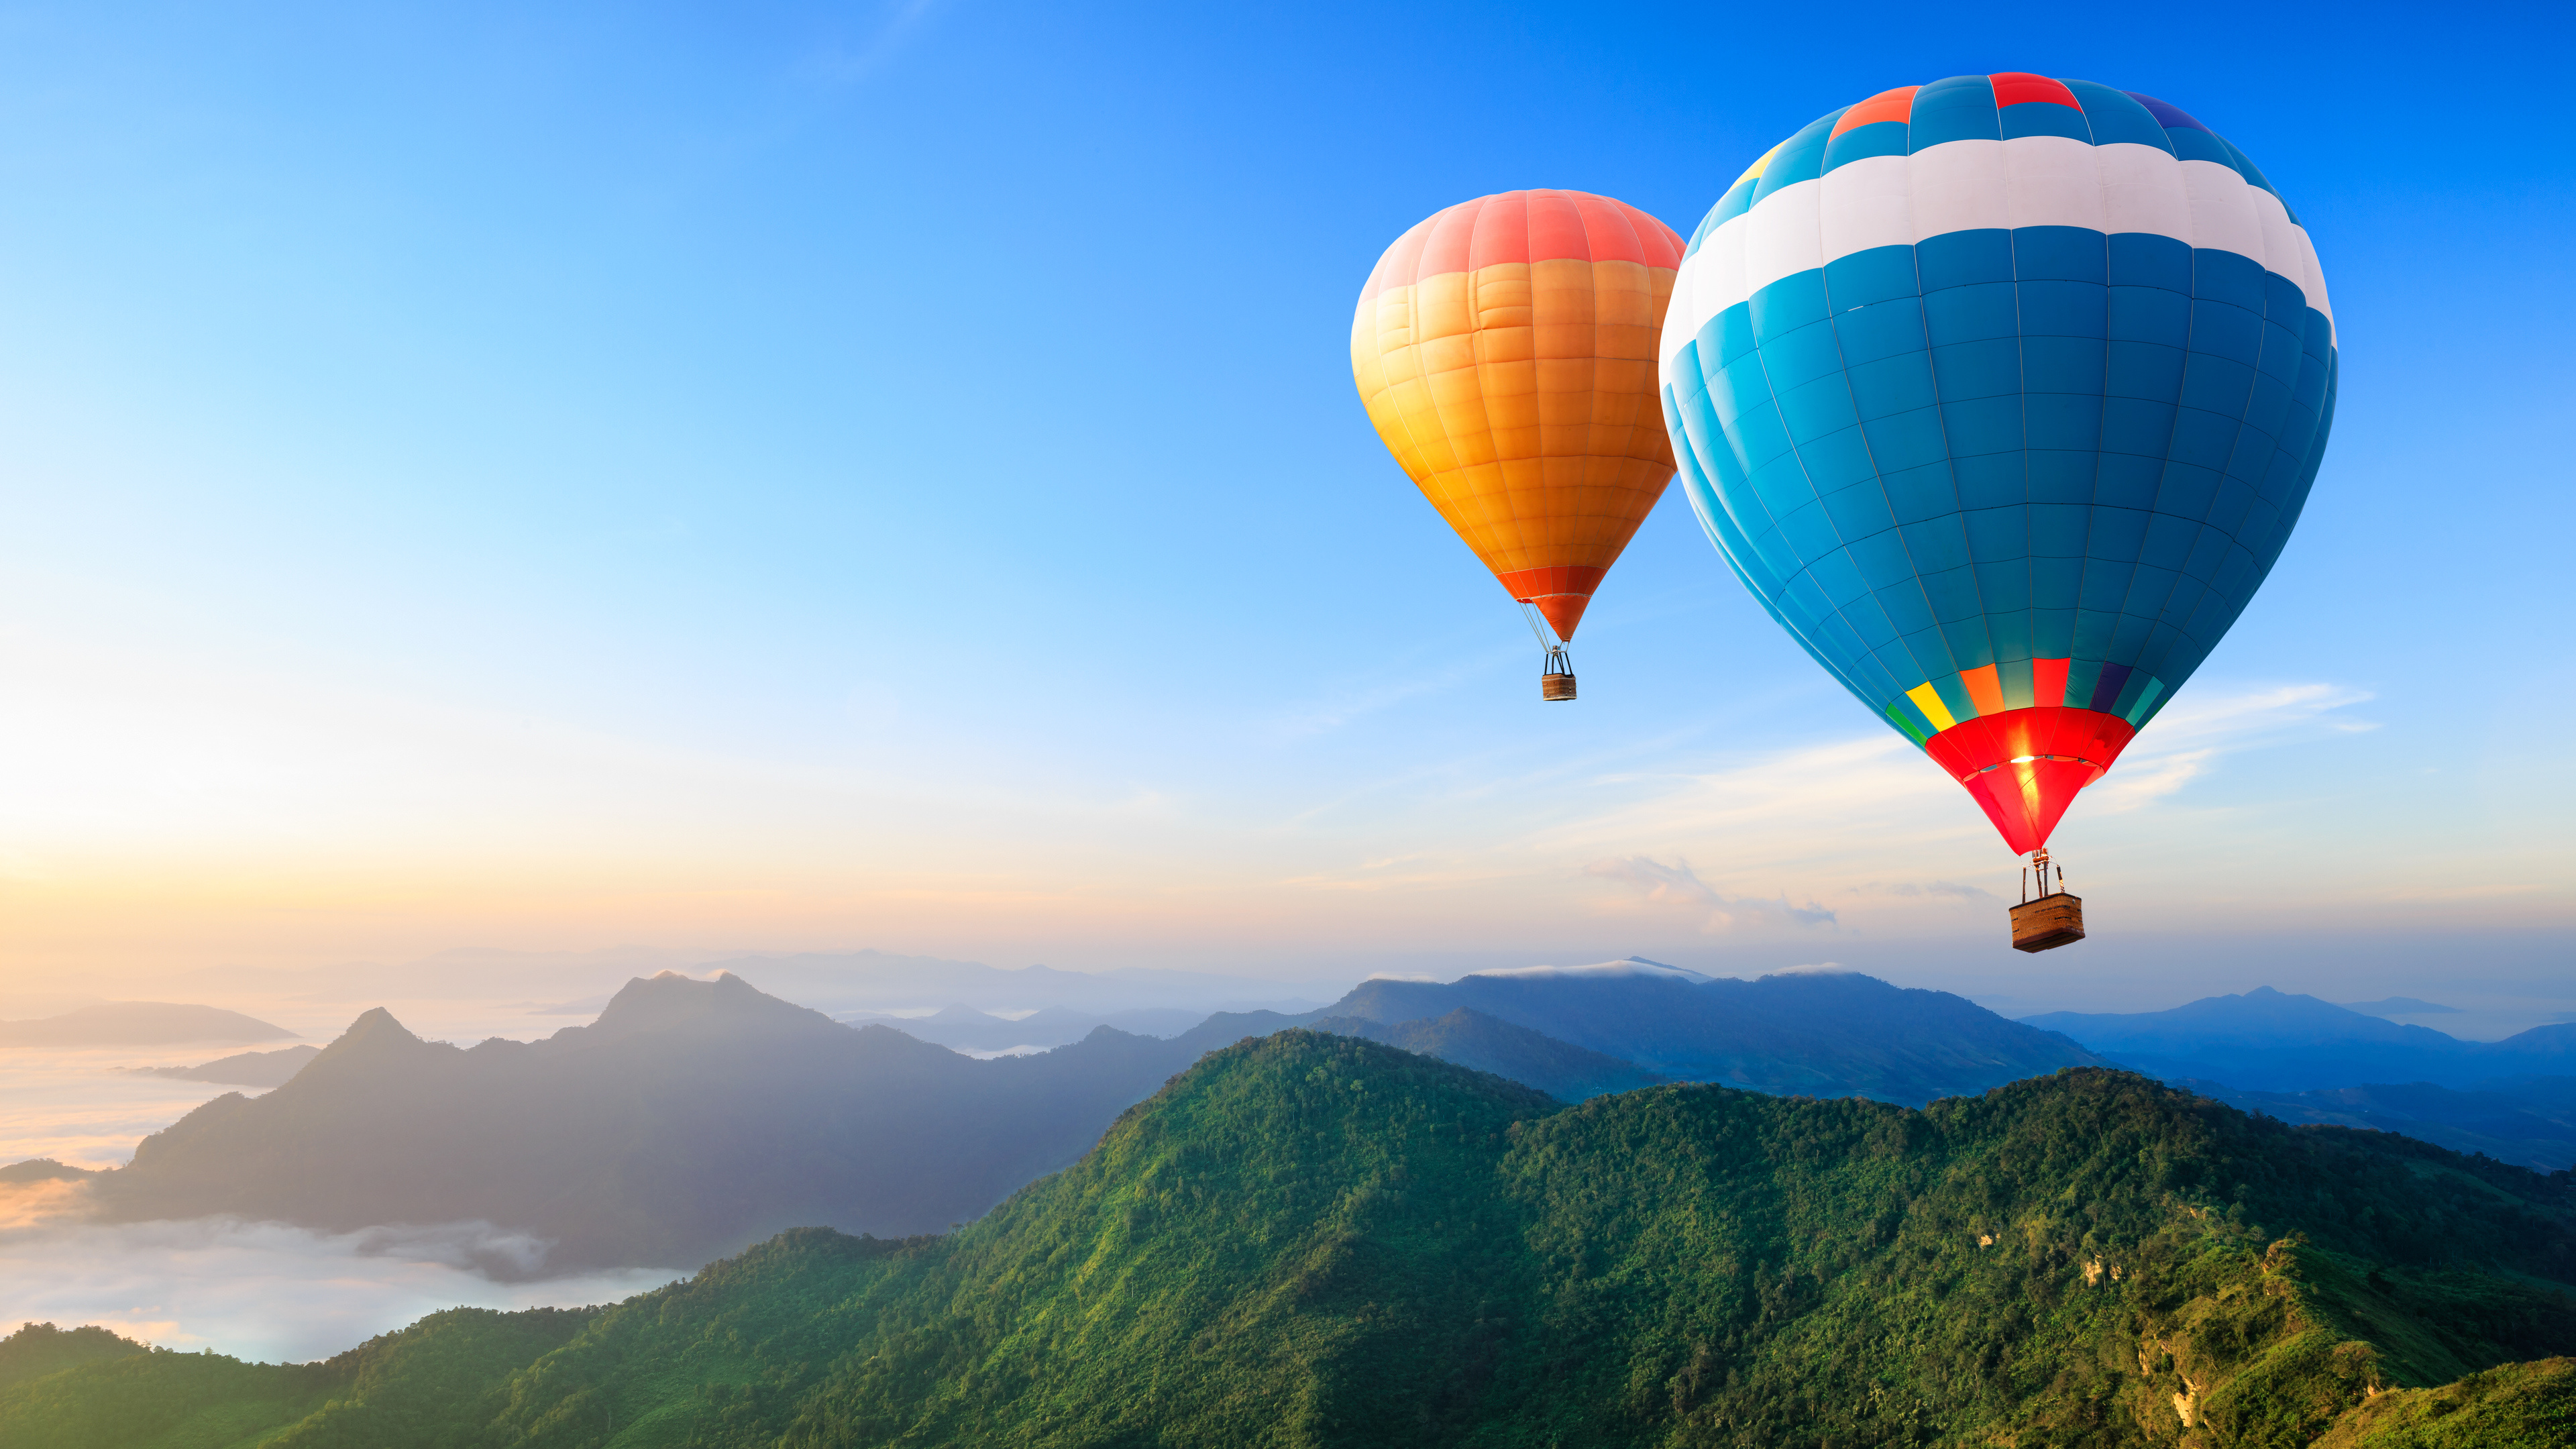 General 3840x2160 hot air balloons landscape nature mountains aerial view clouds sunset forest trees sky blue orange green vehicle